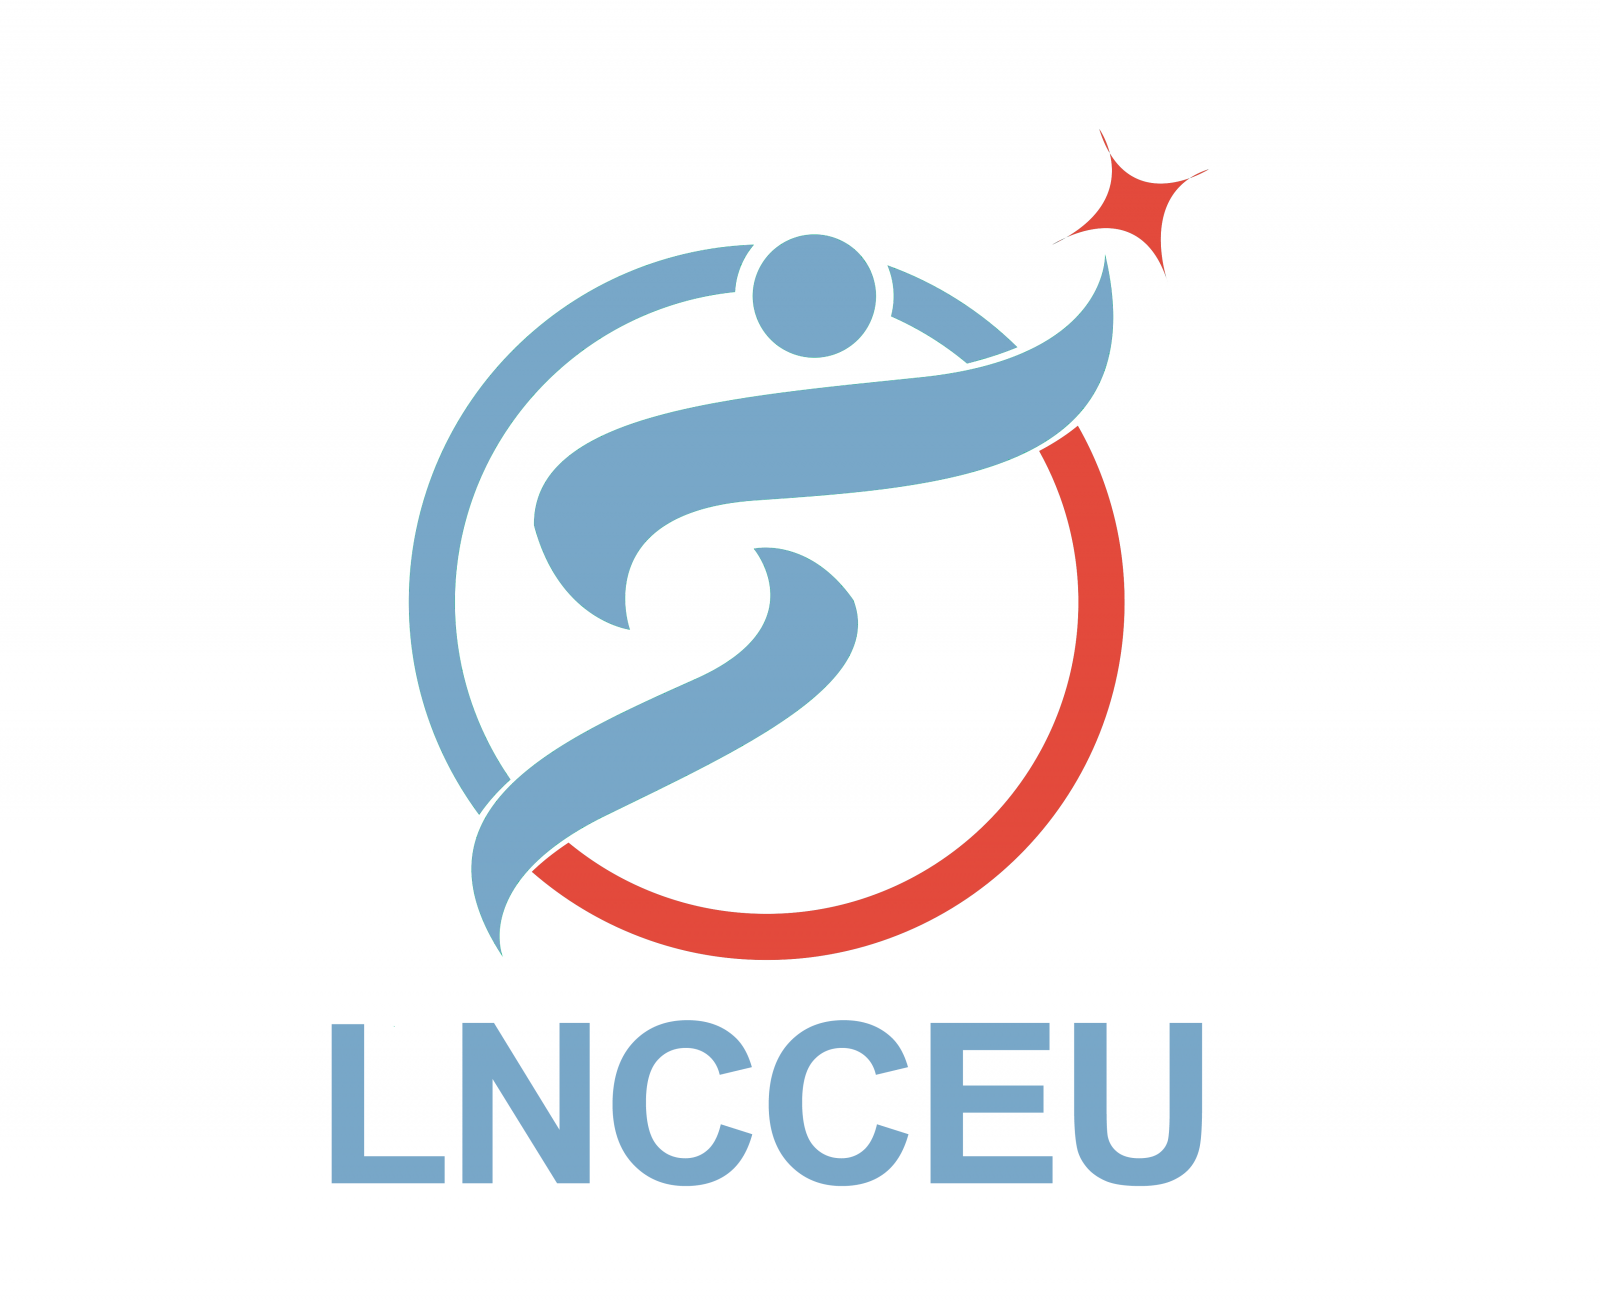 LNCEU.com is the place to go for LNC continuing education